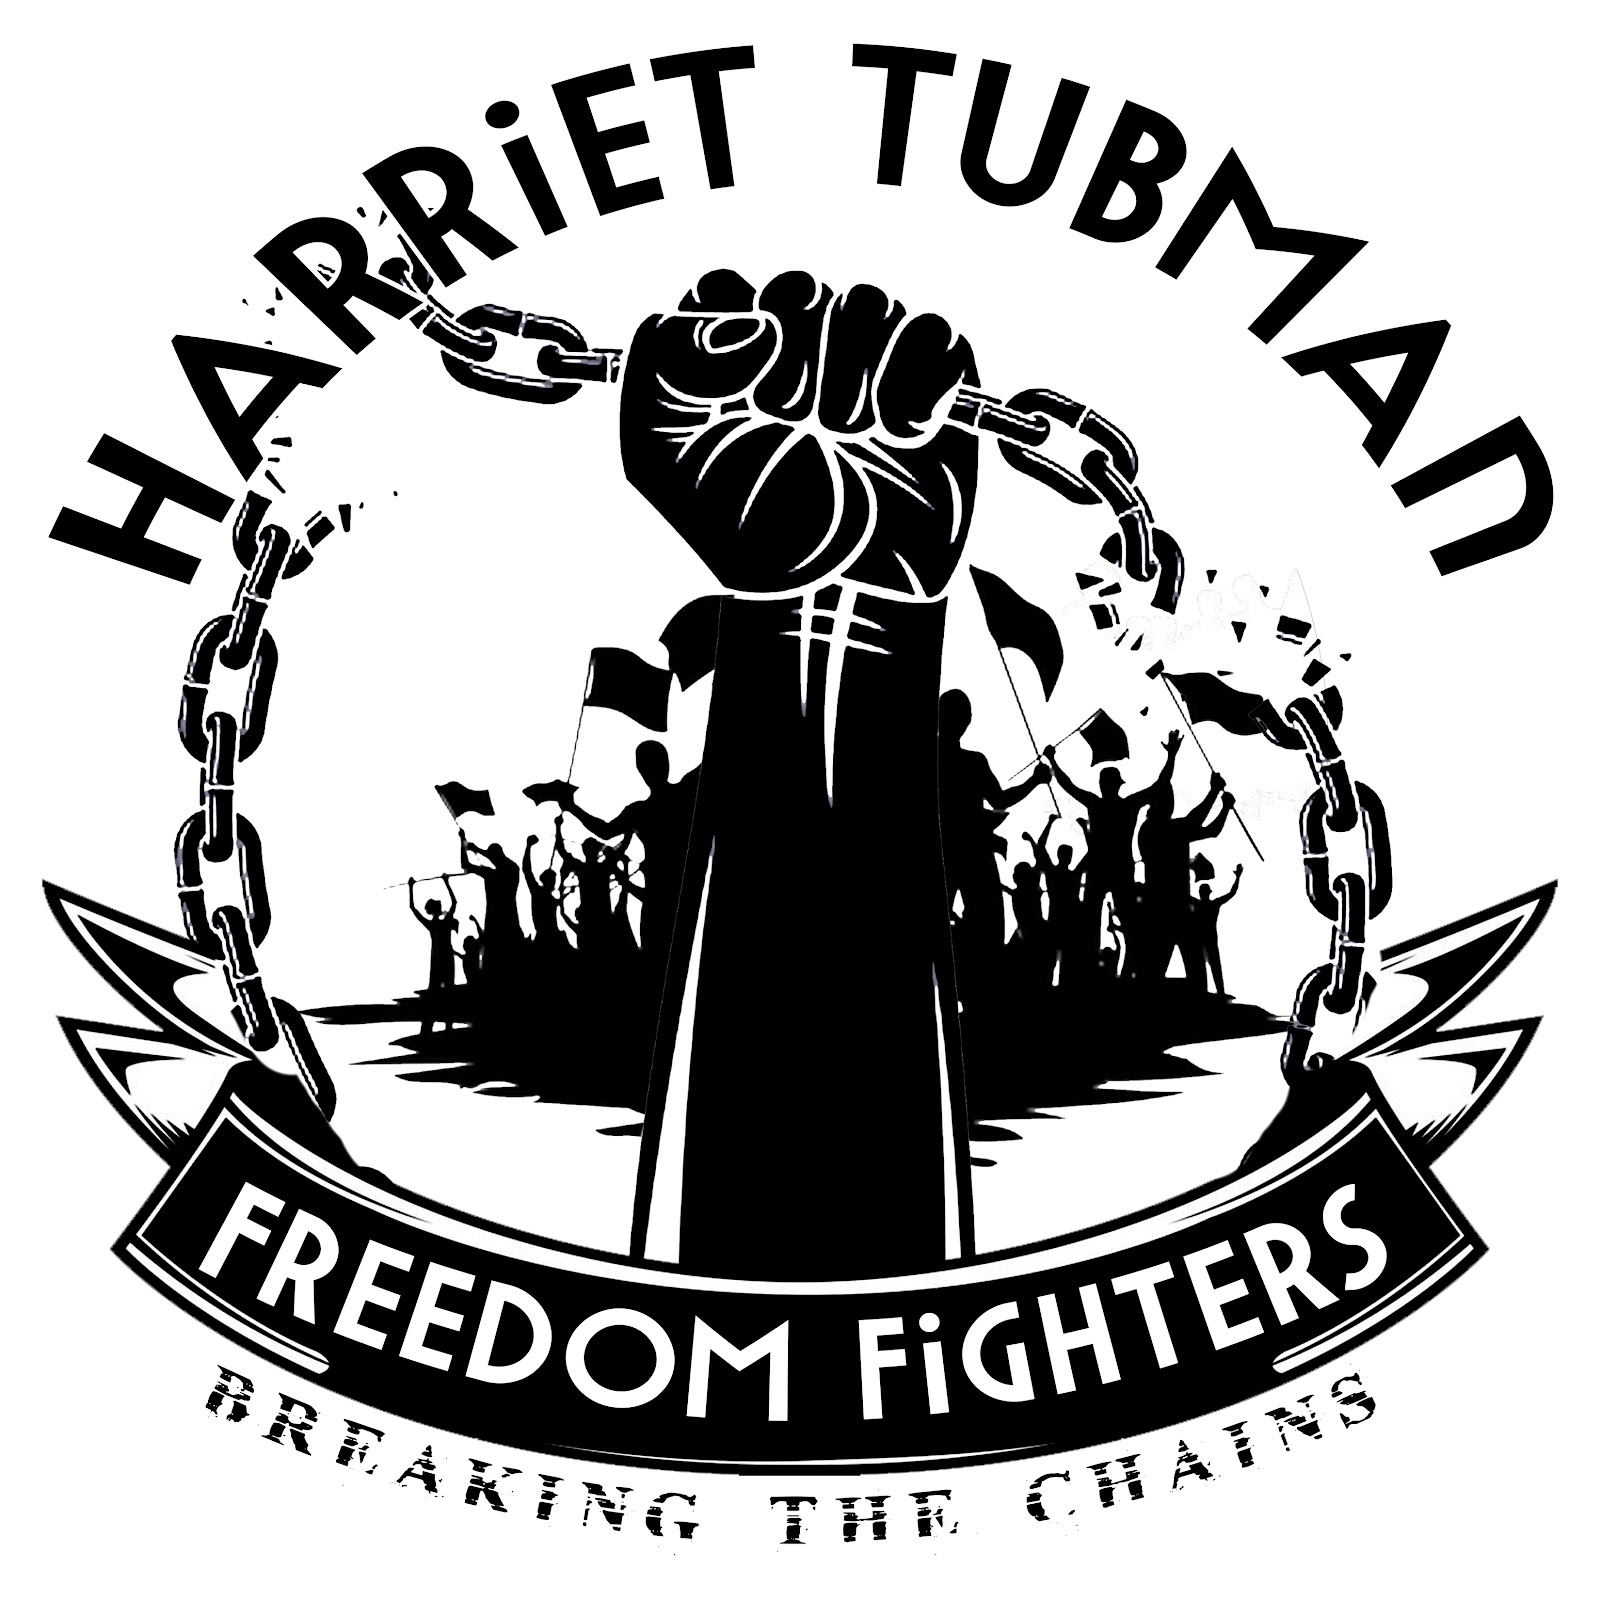 Harriet Tubman Freedom Fighters Corp.